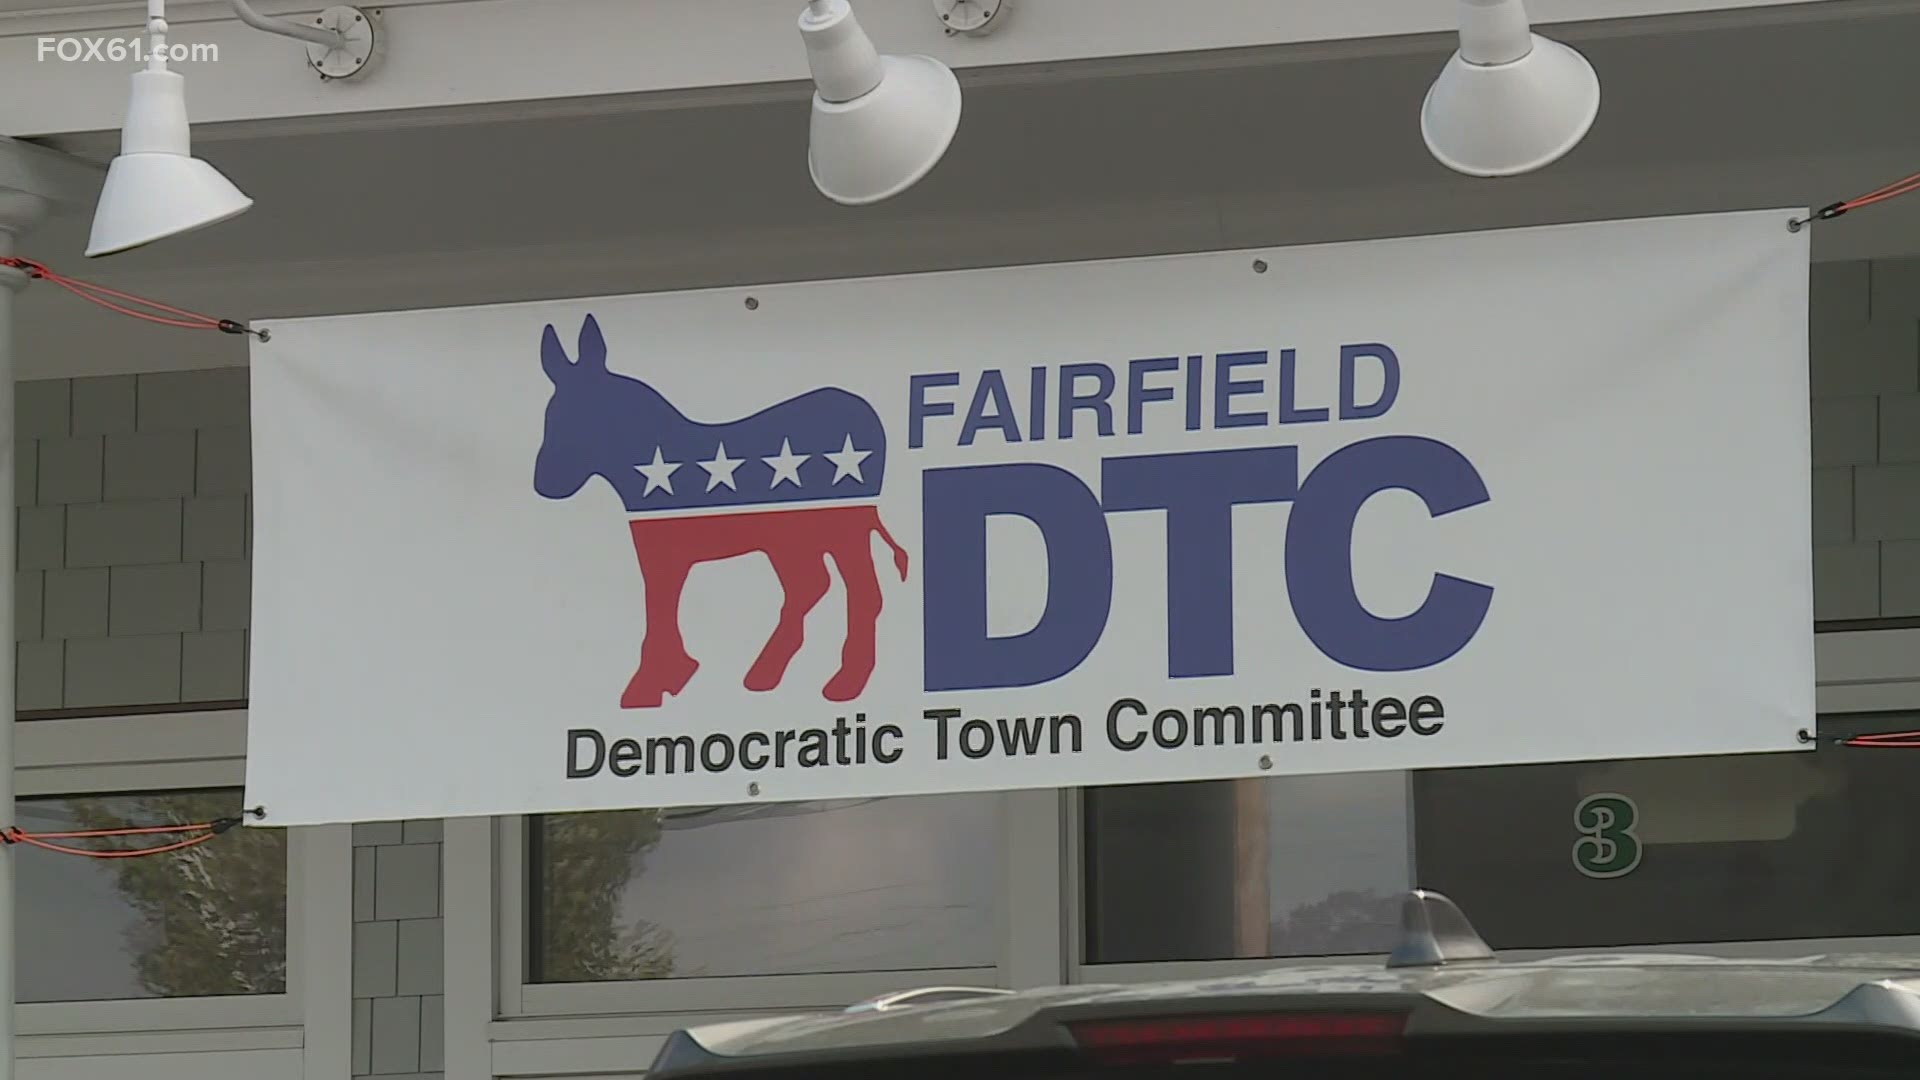 Fairfield Democrats and Republicans are joining together to denounce it.